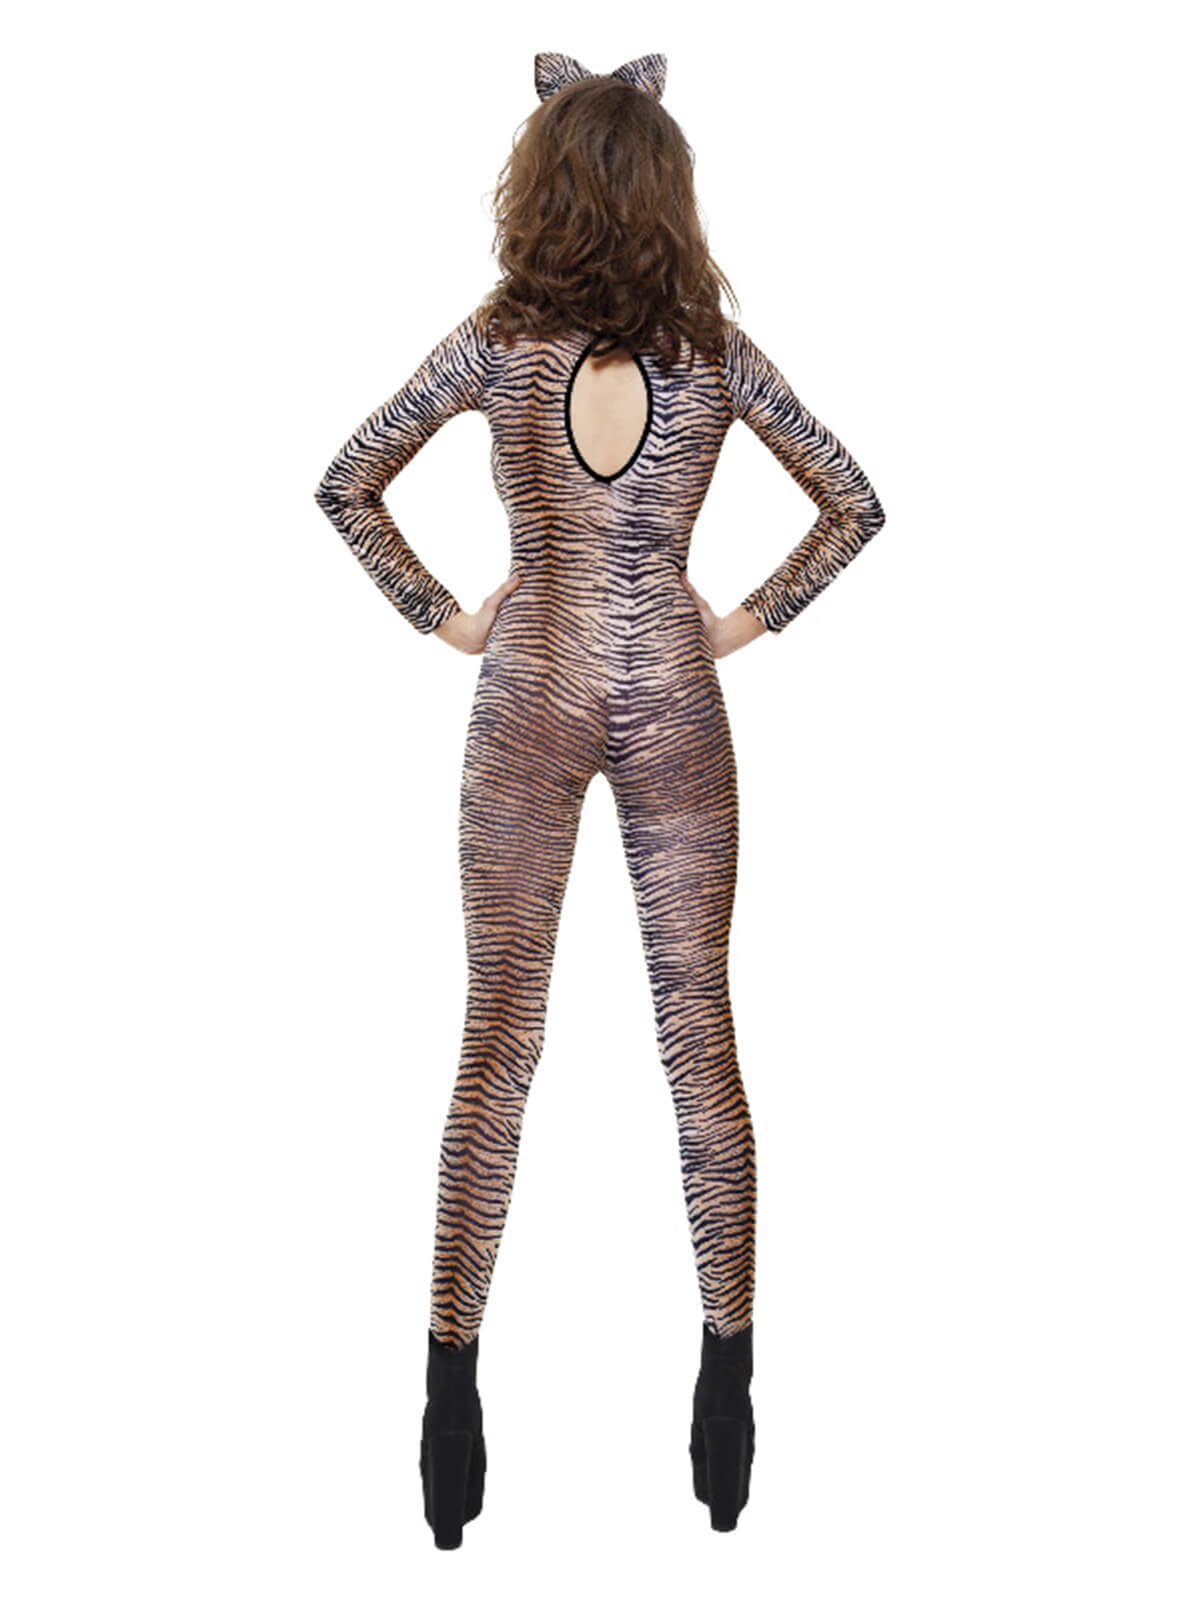 Fever Body Suit Tiger Print